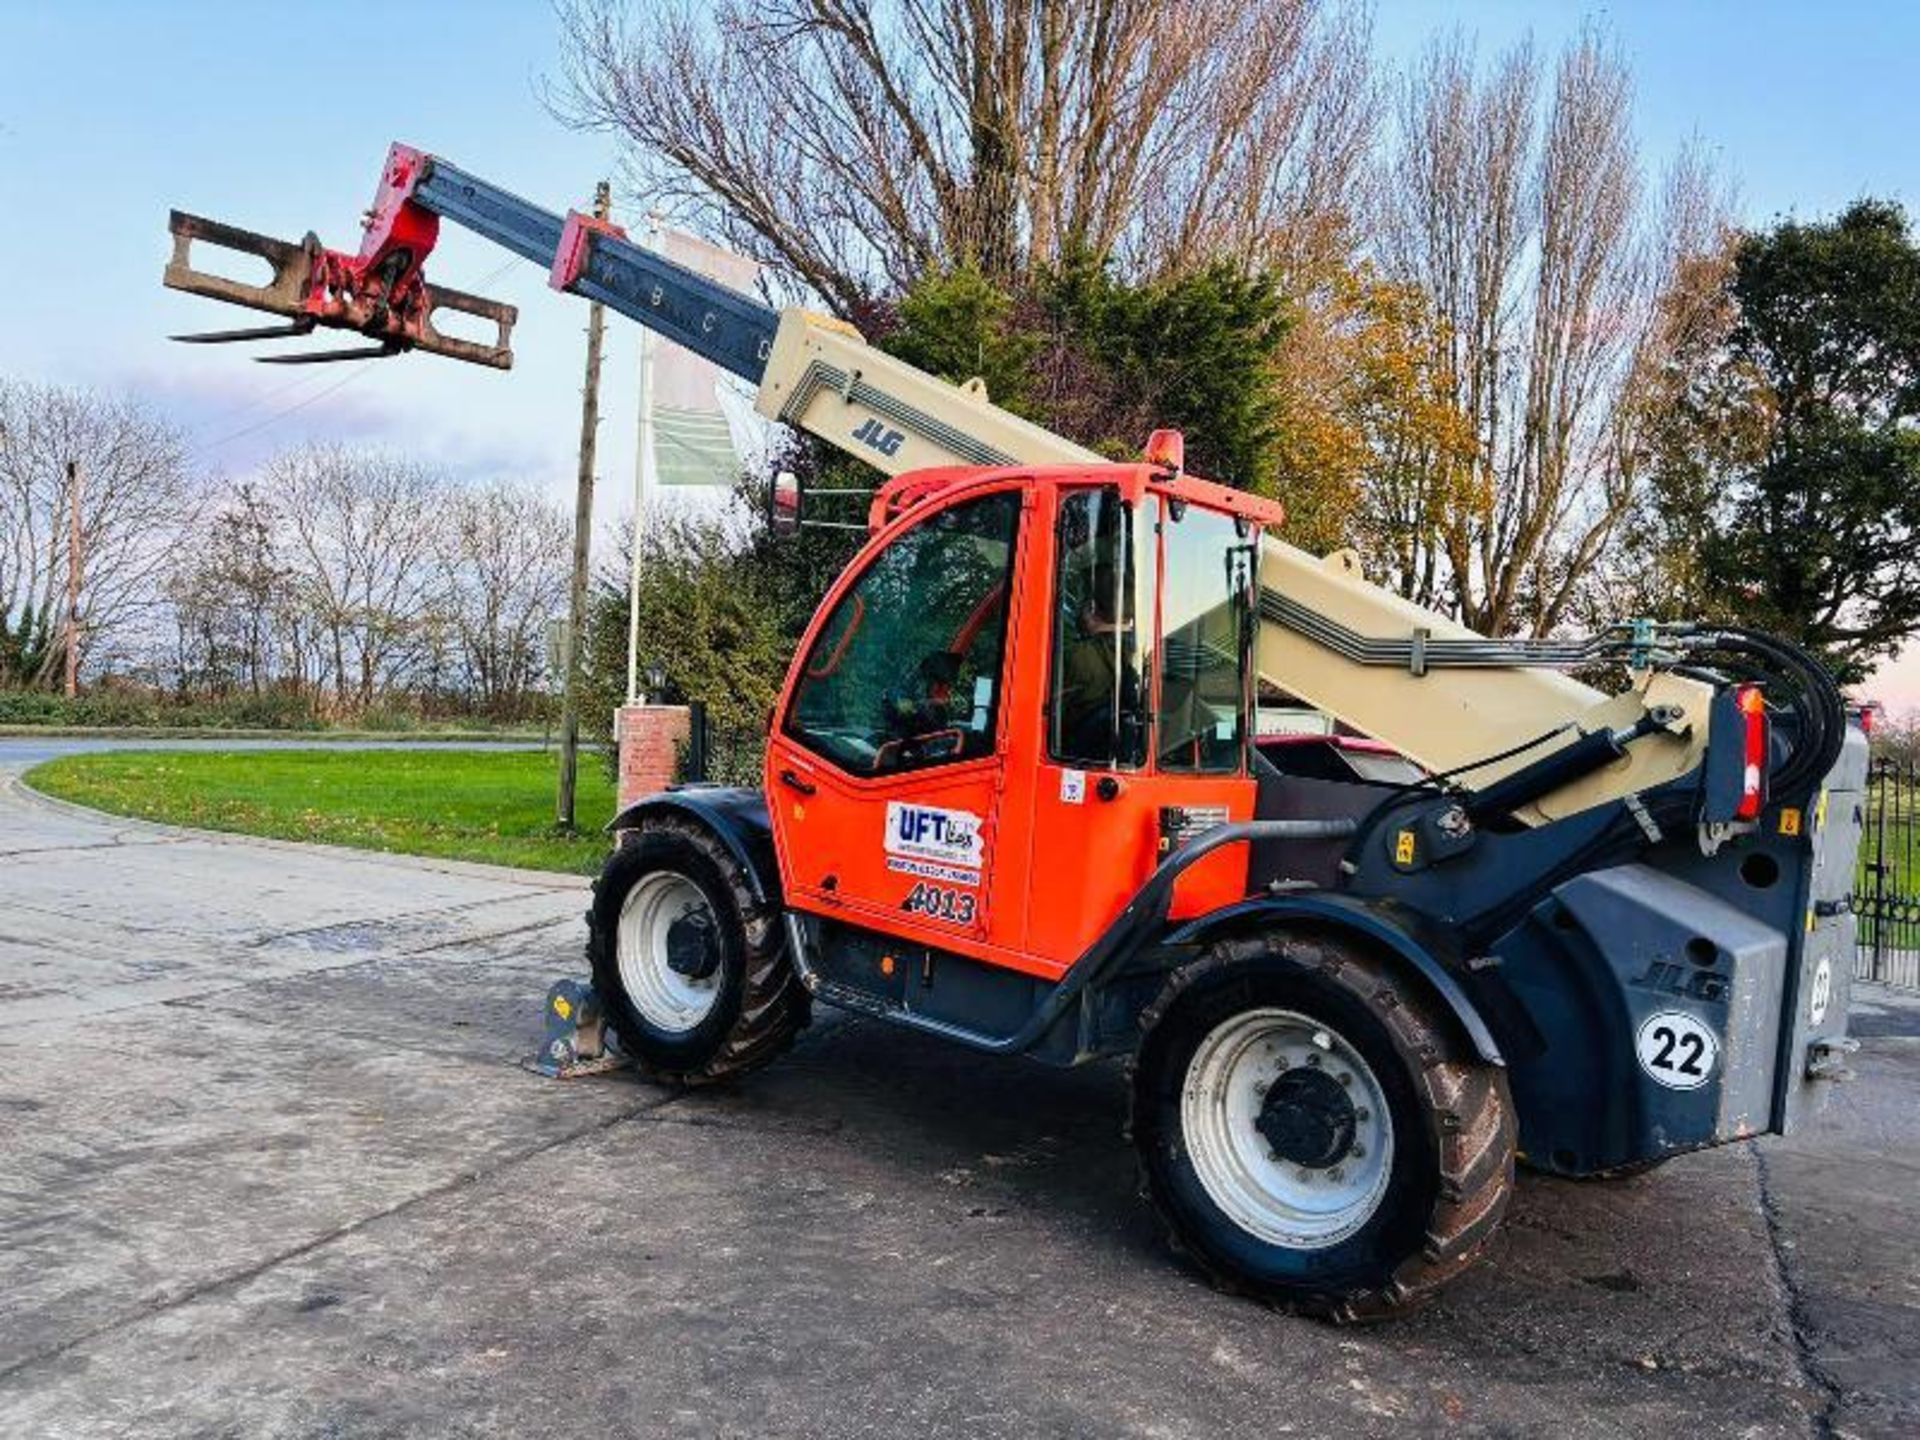 JLG 4013 4WD TELEHANDLER *YEAR 2007, 6881 HOURS* C/W LONG PALLET TINES - Image 12 of 20